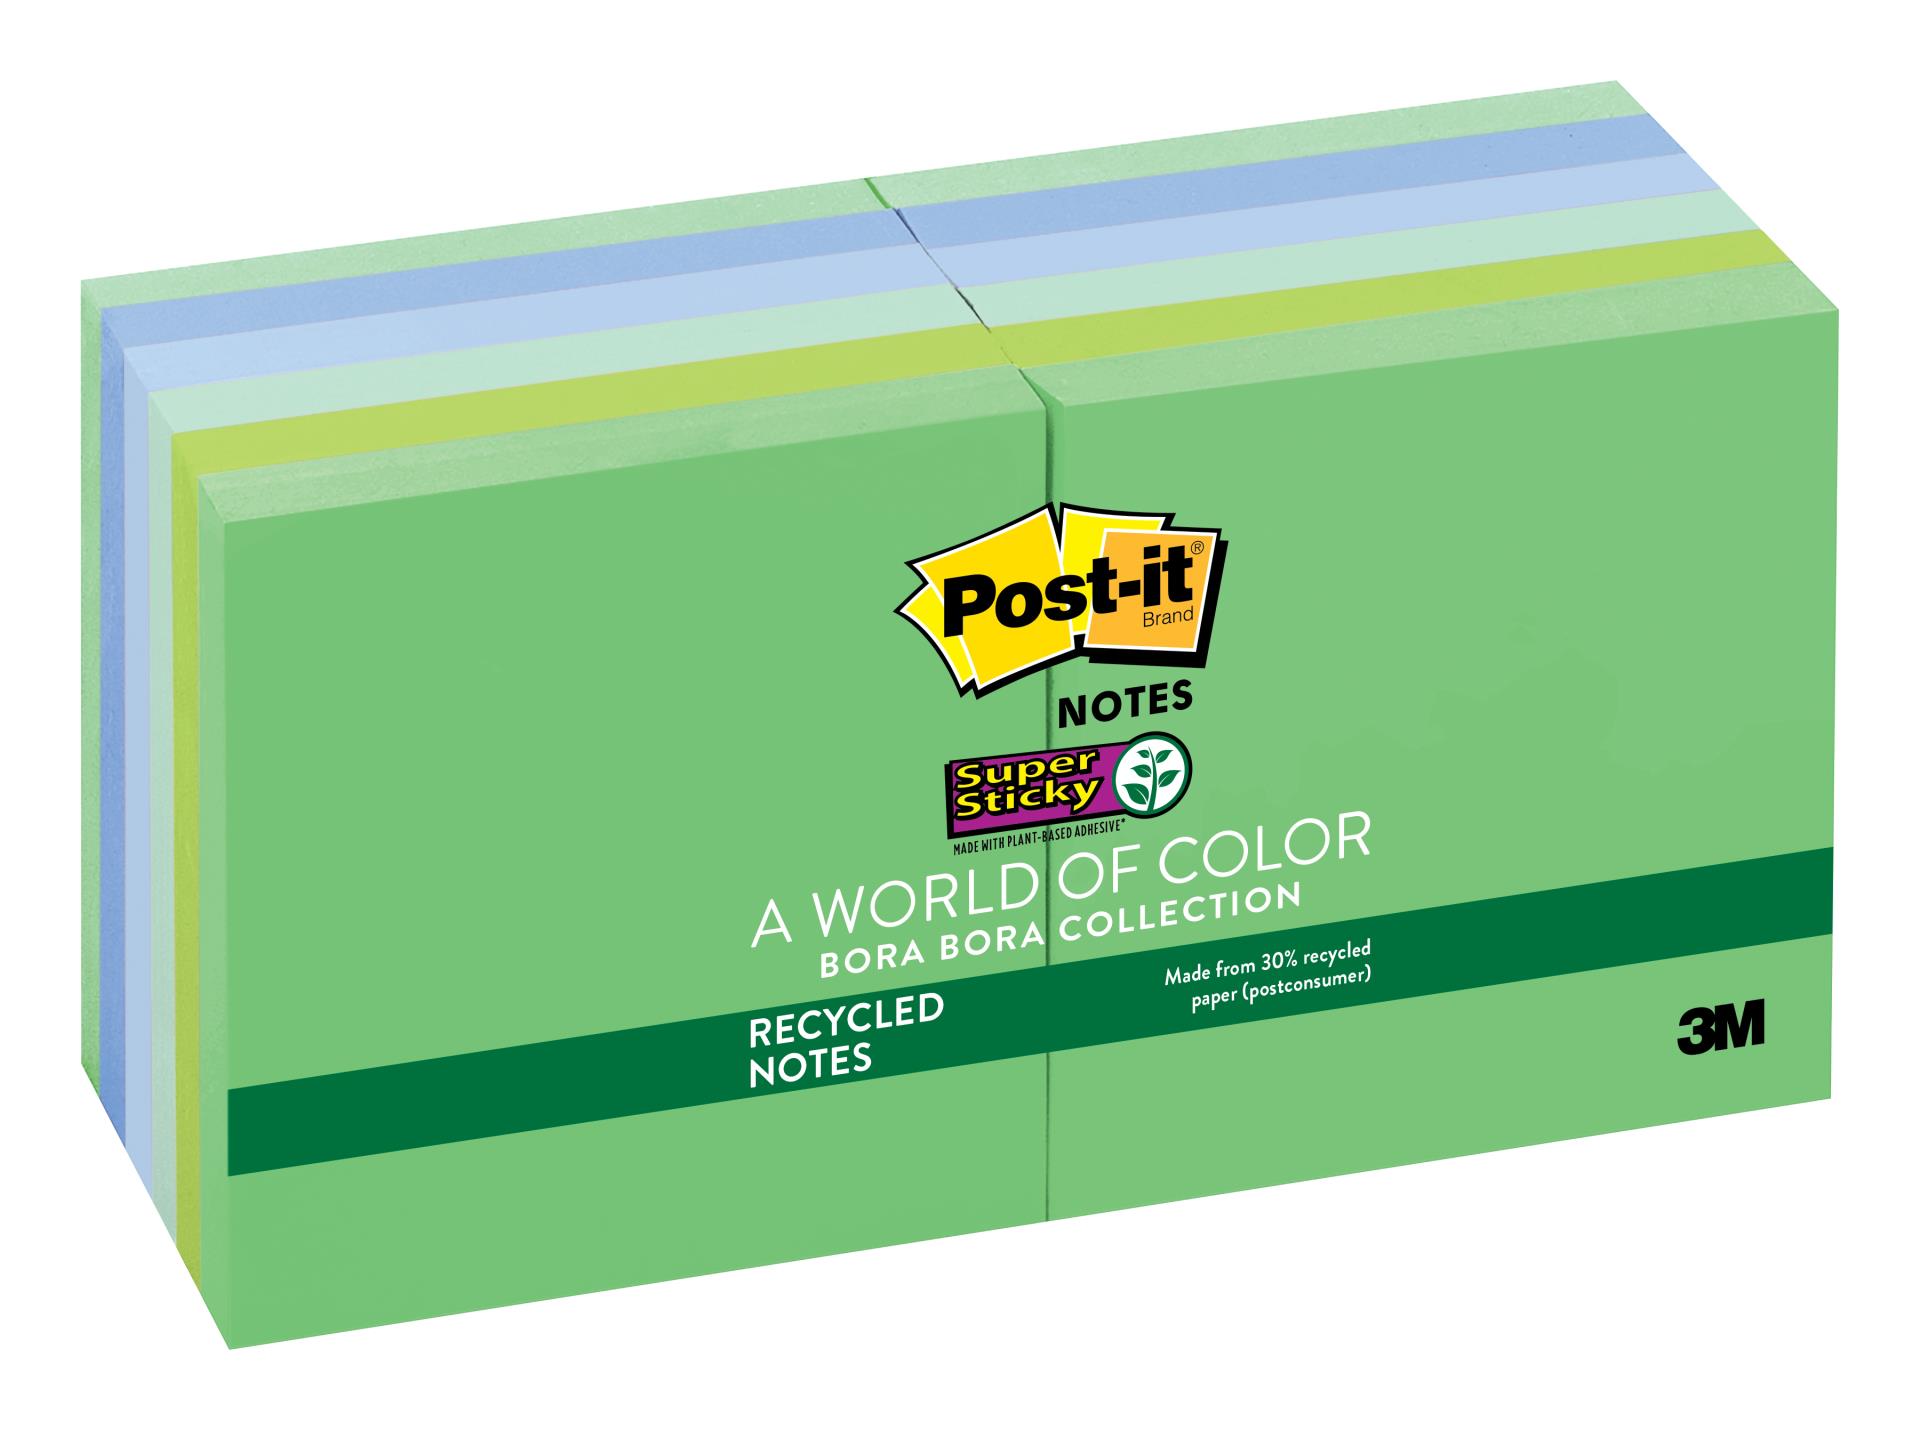 7010332776 - Post-it® Super Sticky Recycled Notes 654-12SST, 3 in x 3 in (76 mm x 76 mm) Bora Bora Collection